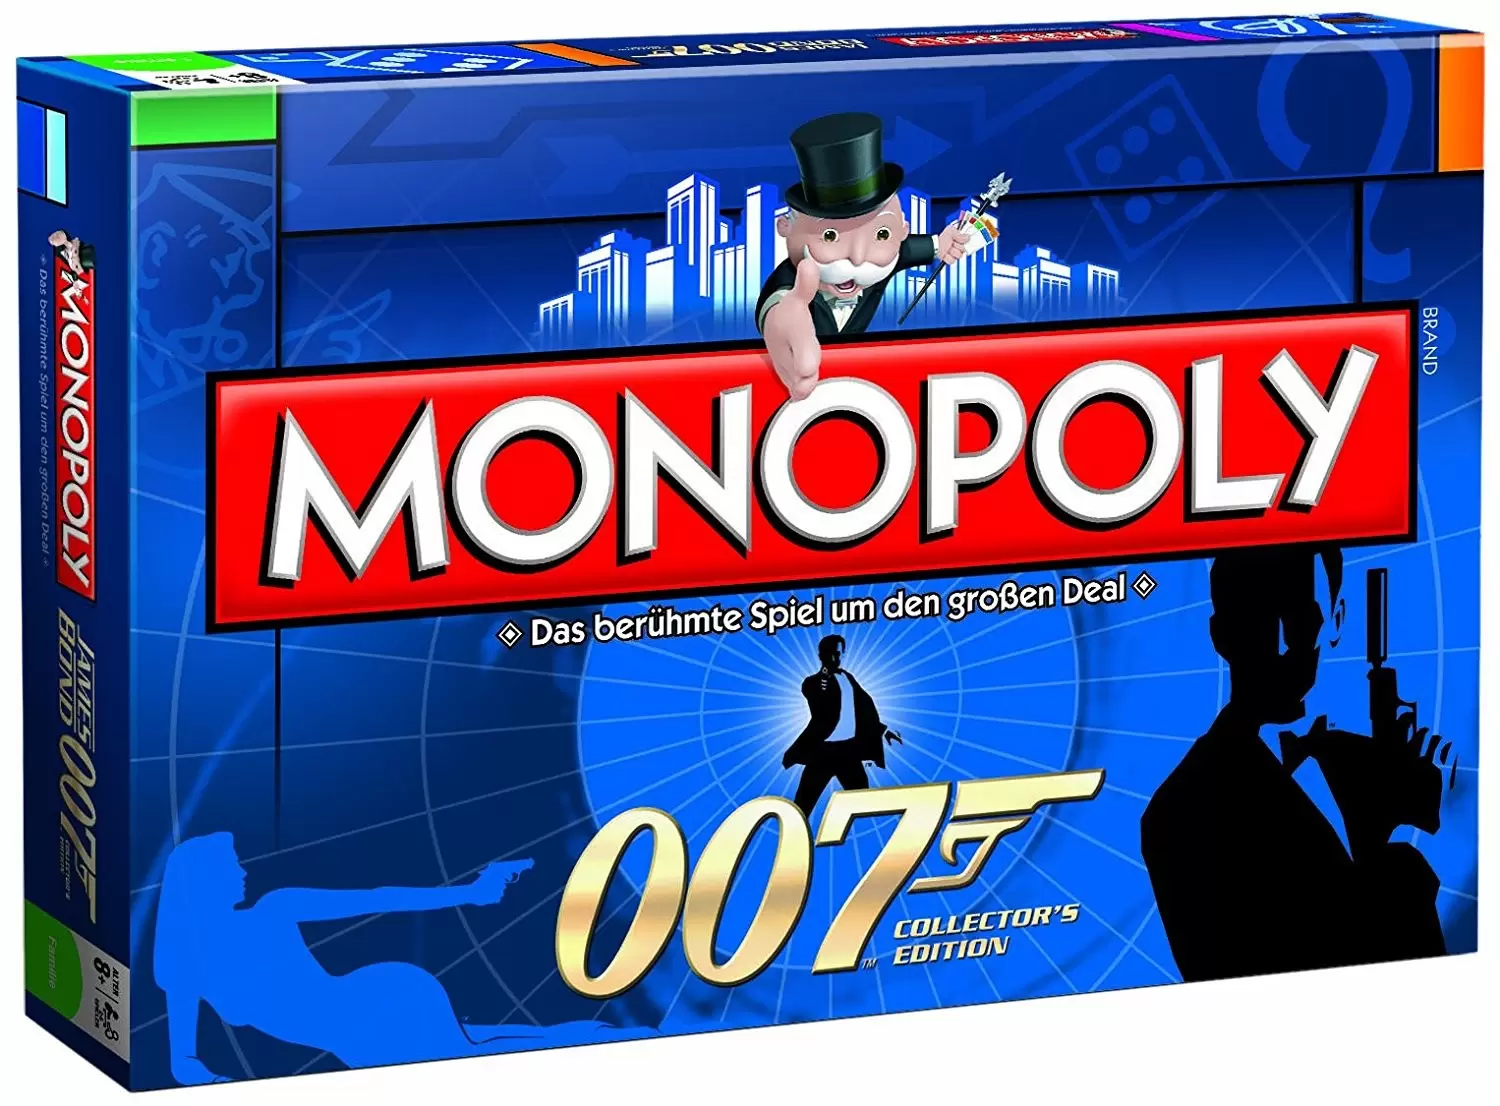 Monopoly Films & Séries TV - Monopoly 007 : Edition collector